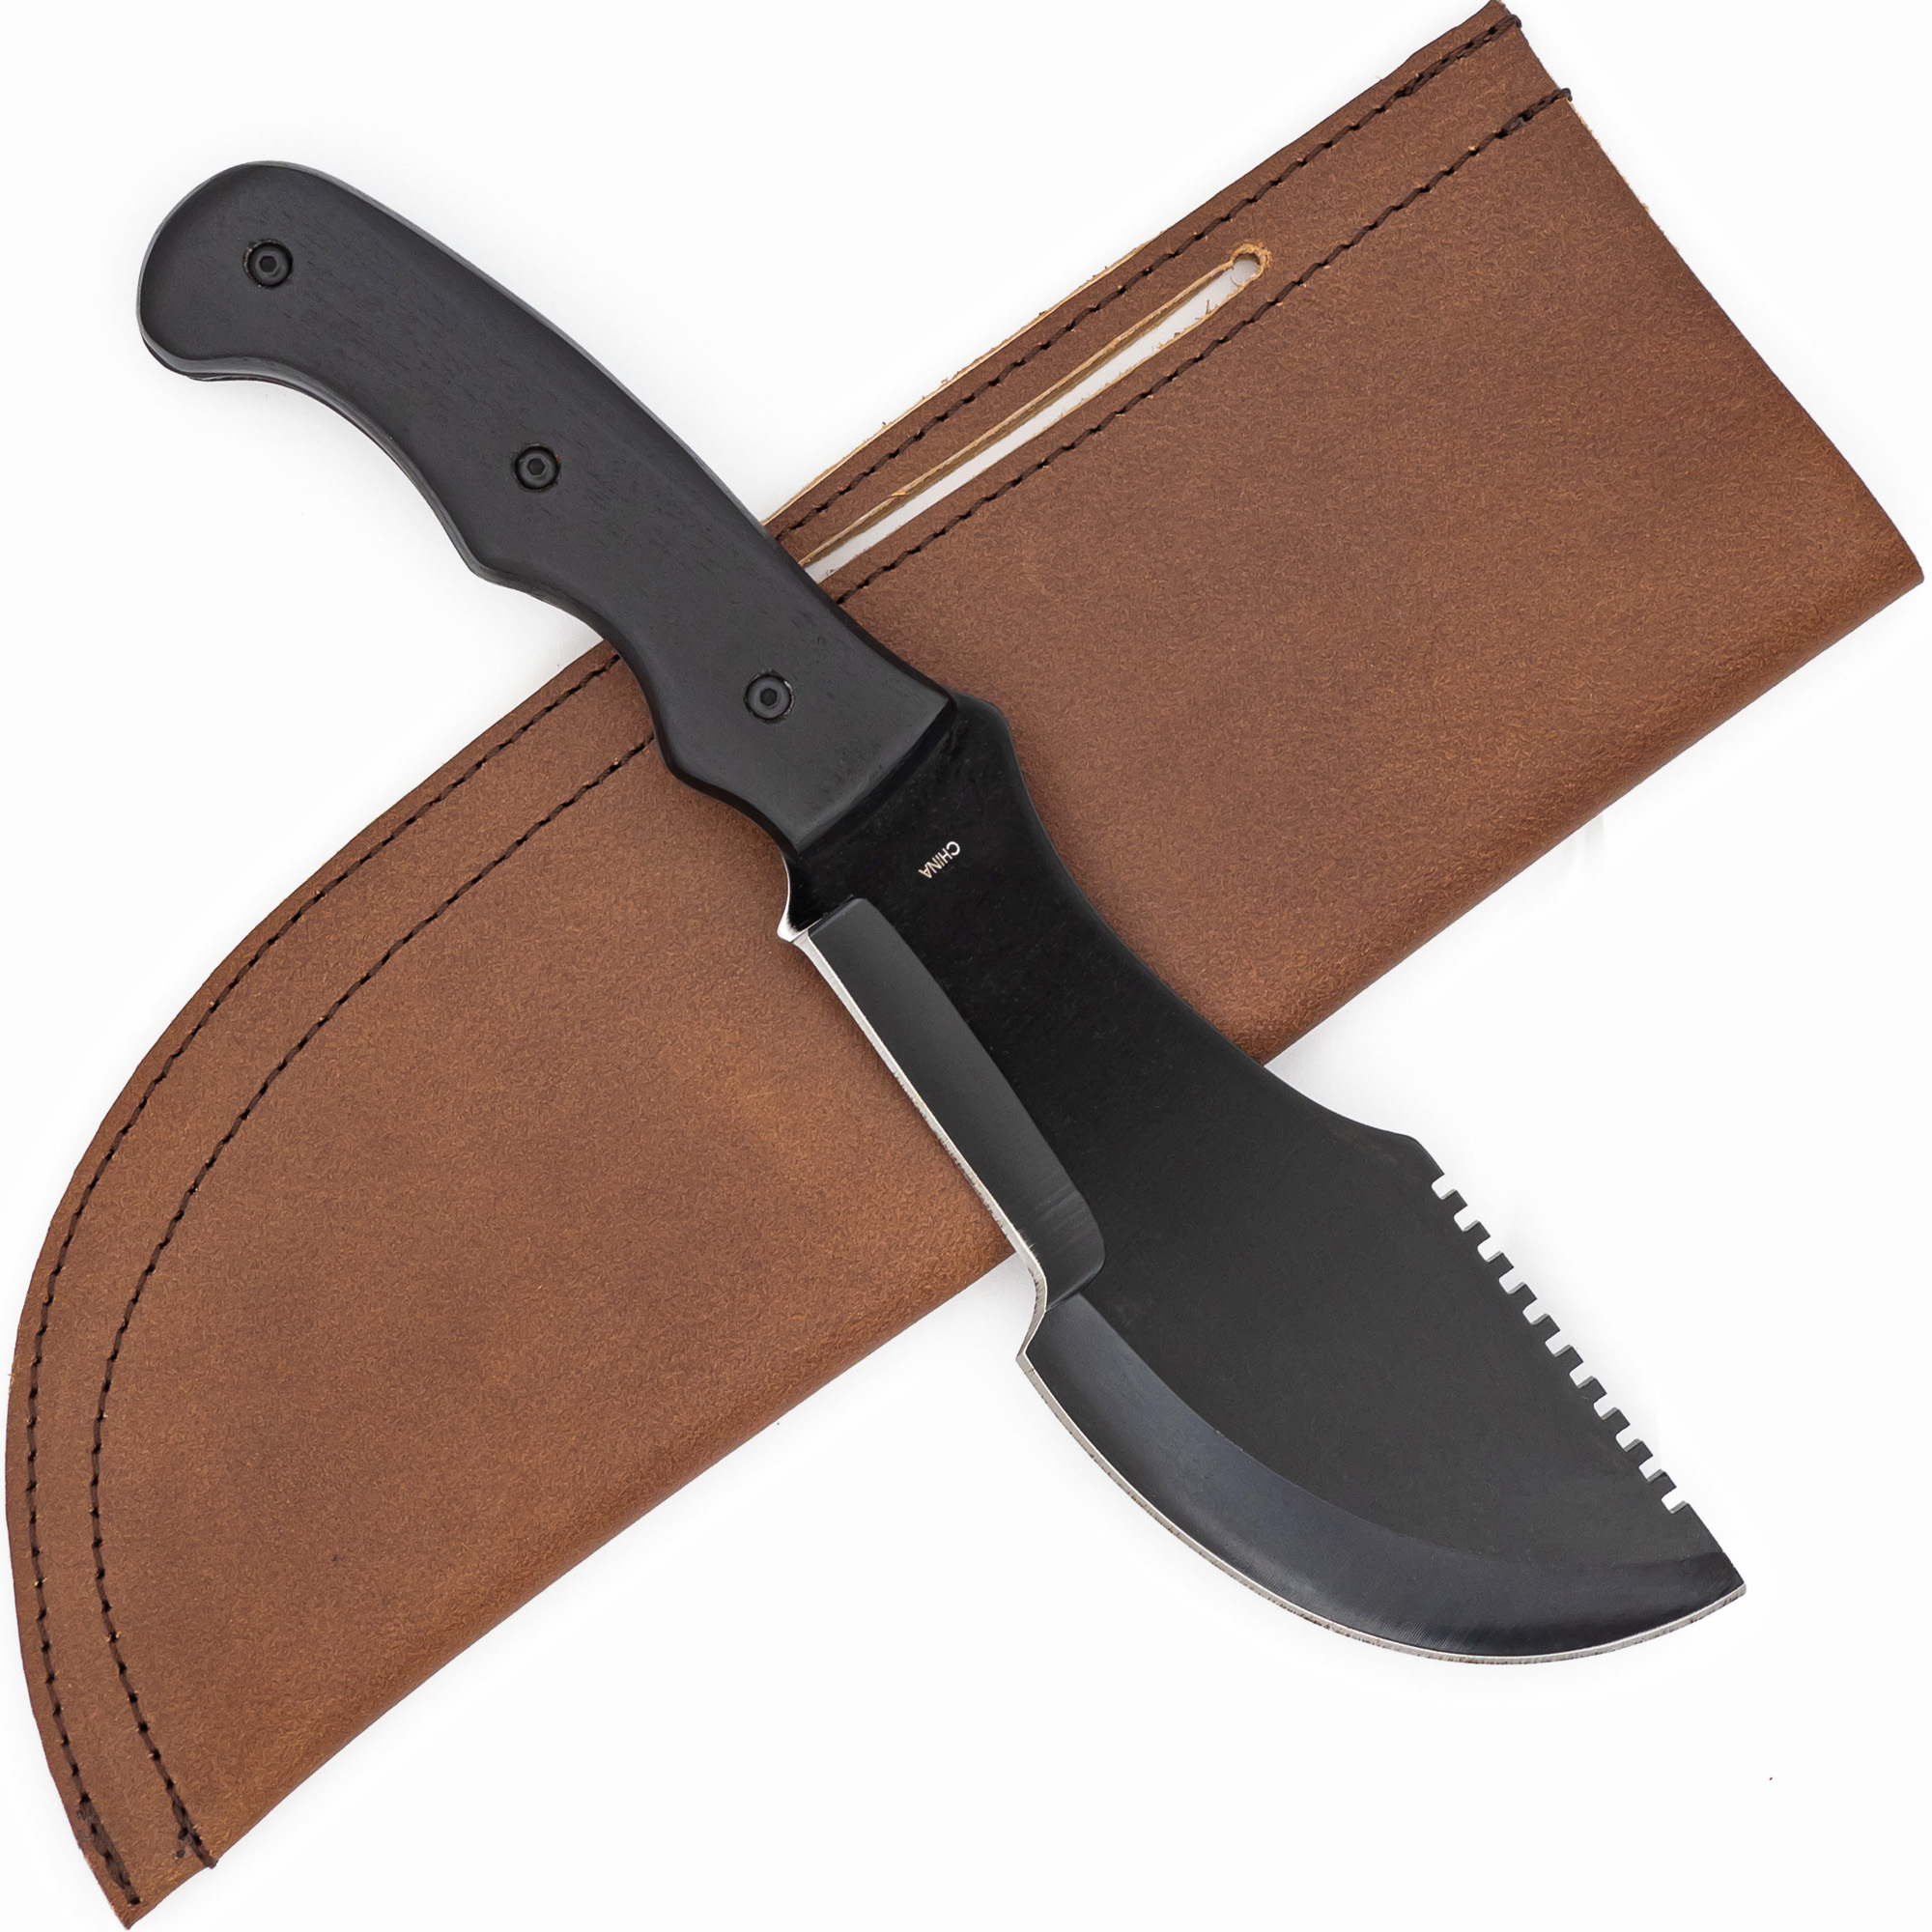 Dark Clouds Fixed Blade Sawback Tracker Knife with Genuine Leather Pouch